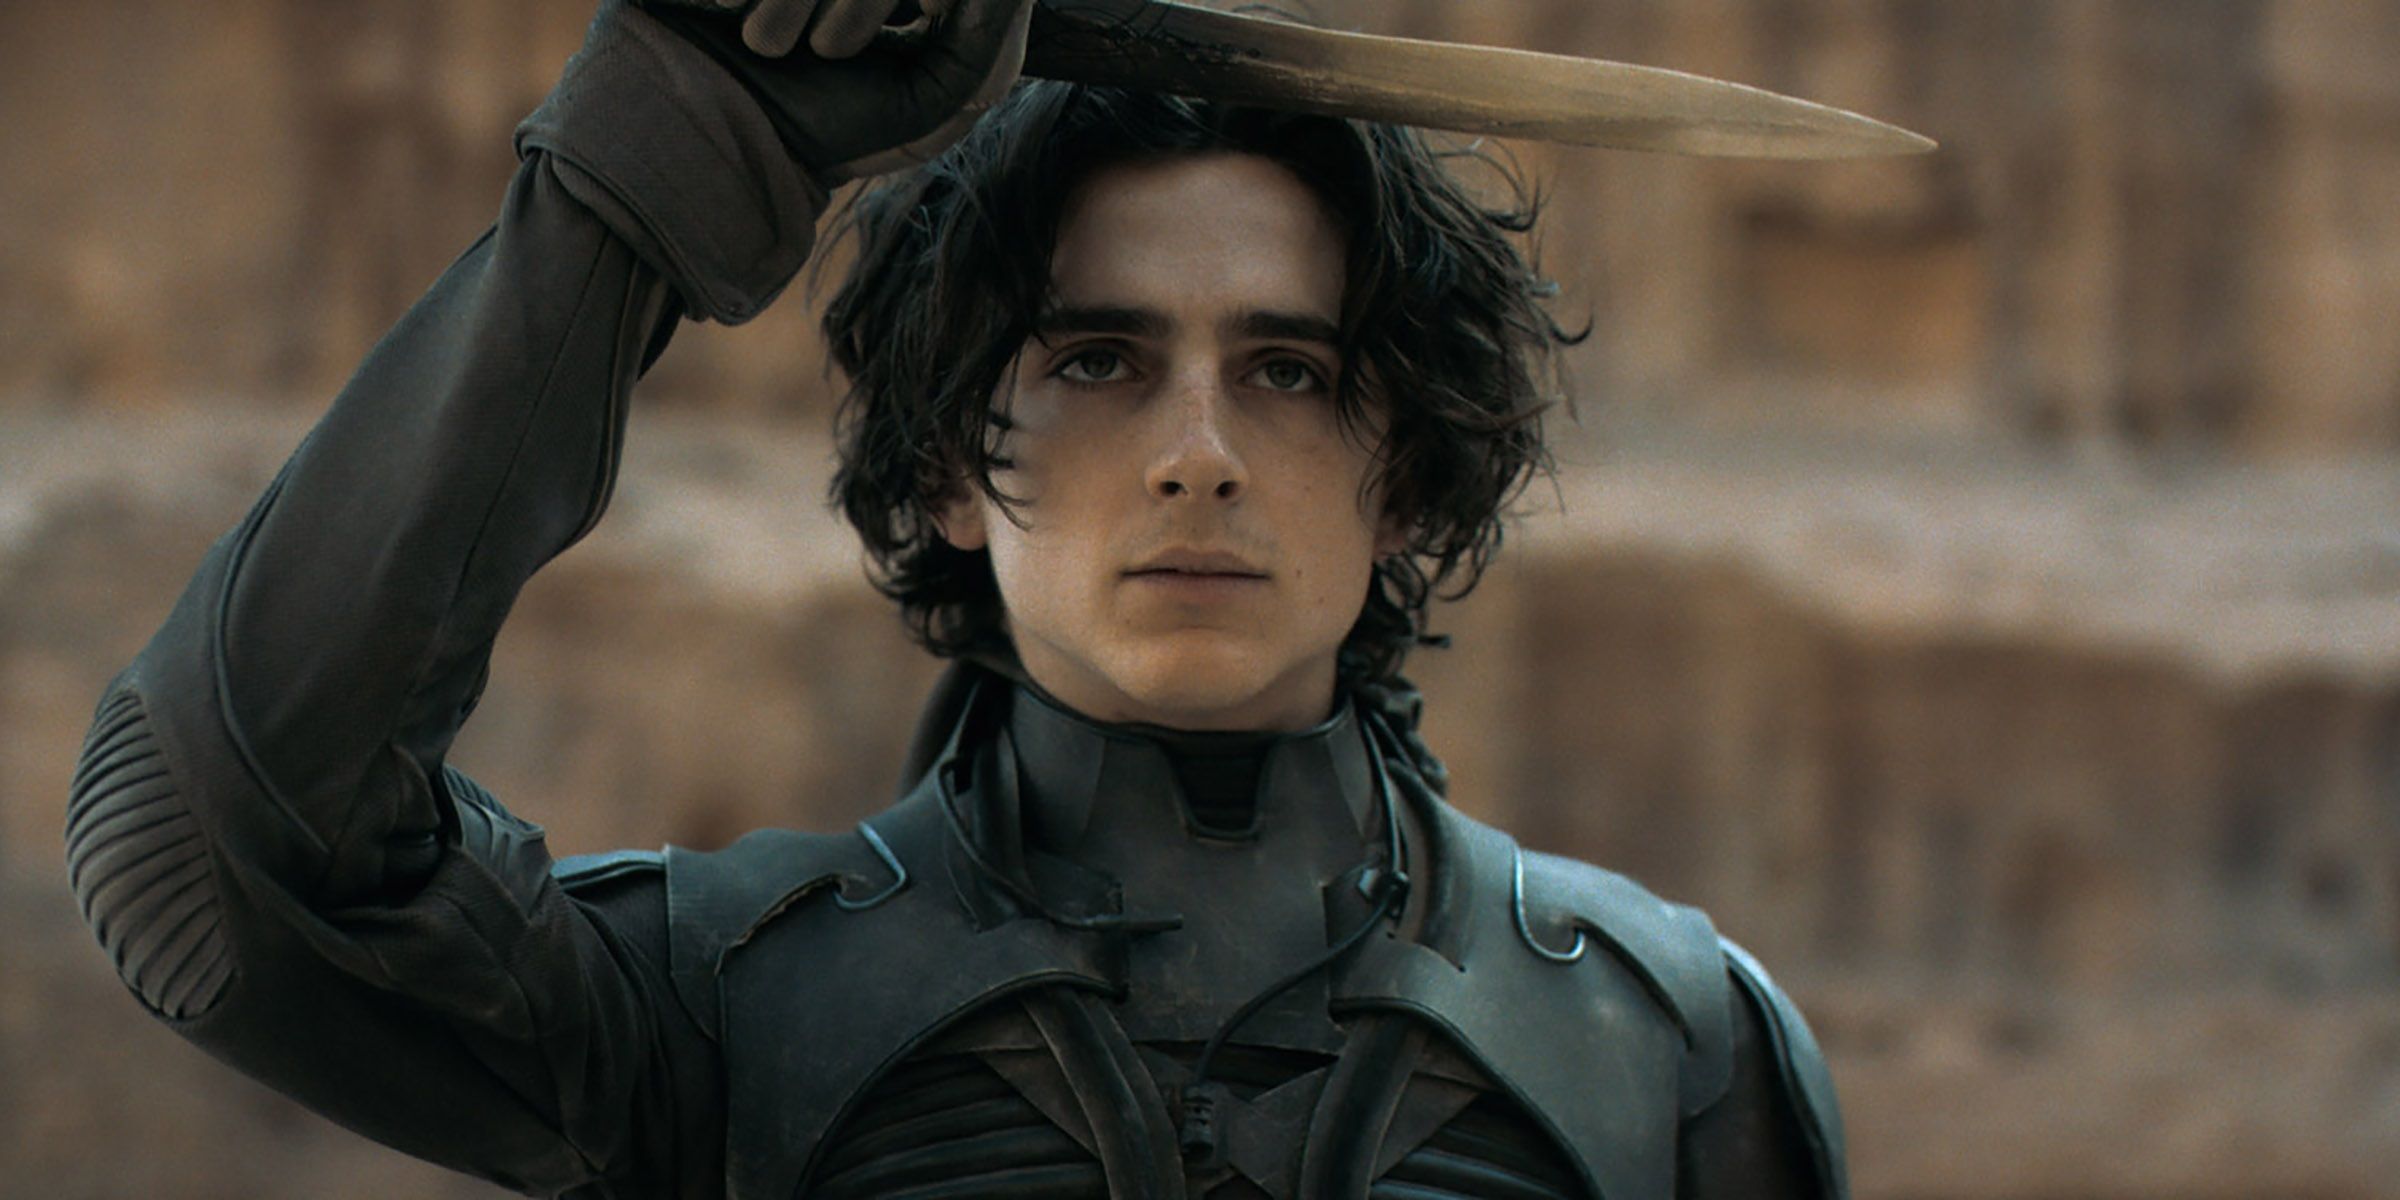 Timothee Chalamet as Paul holding a blade in Dune